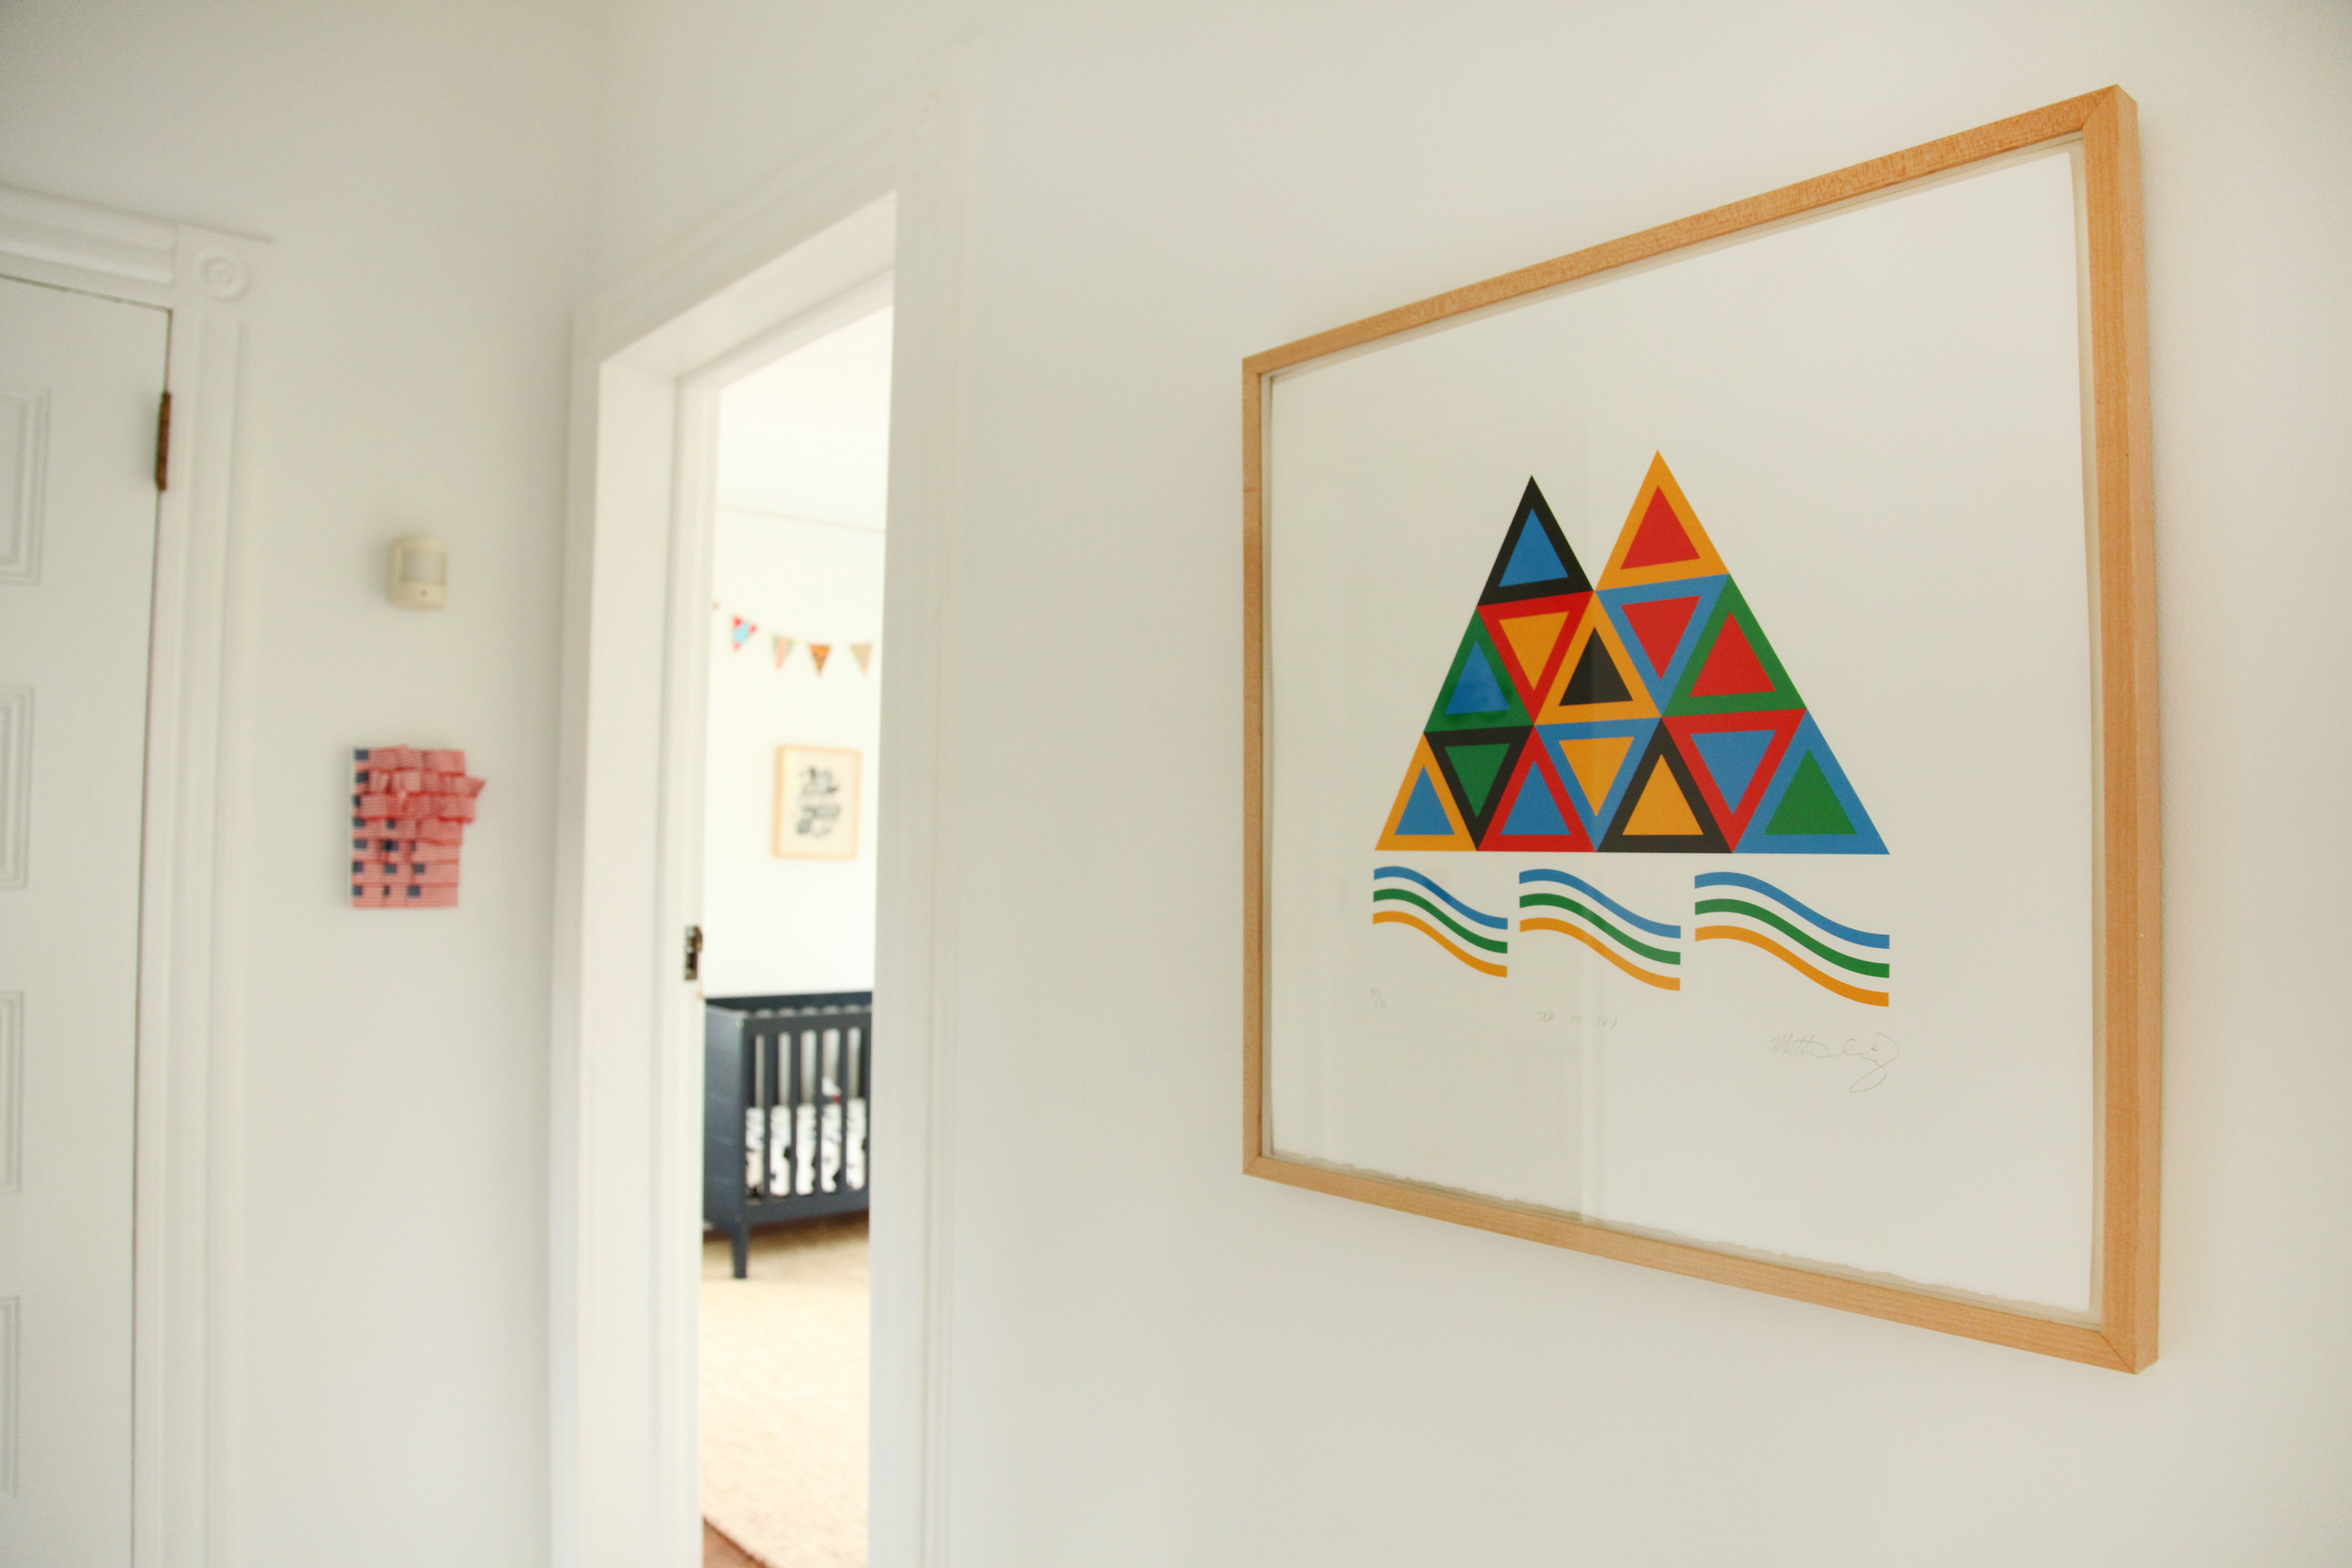  Triangle piece by  Matt Irving.  Danielle made the American flag collage that &nbsp;hangs in the back. 